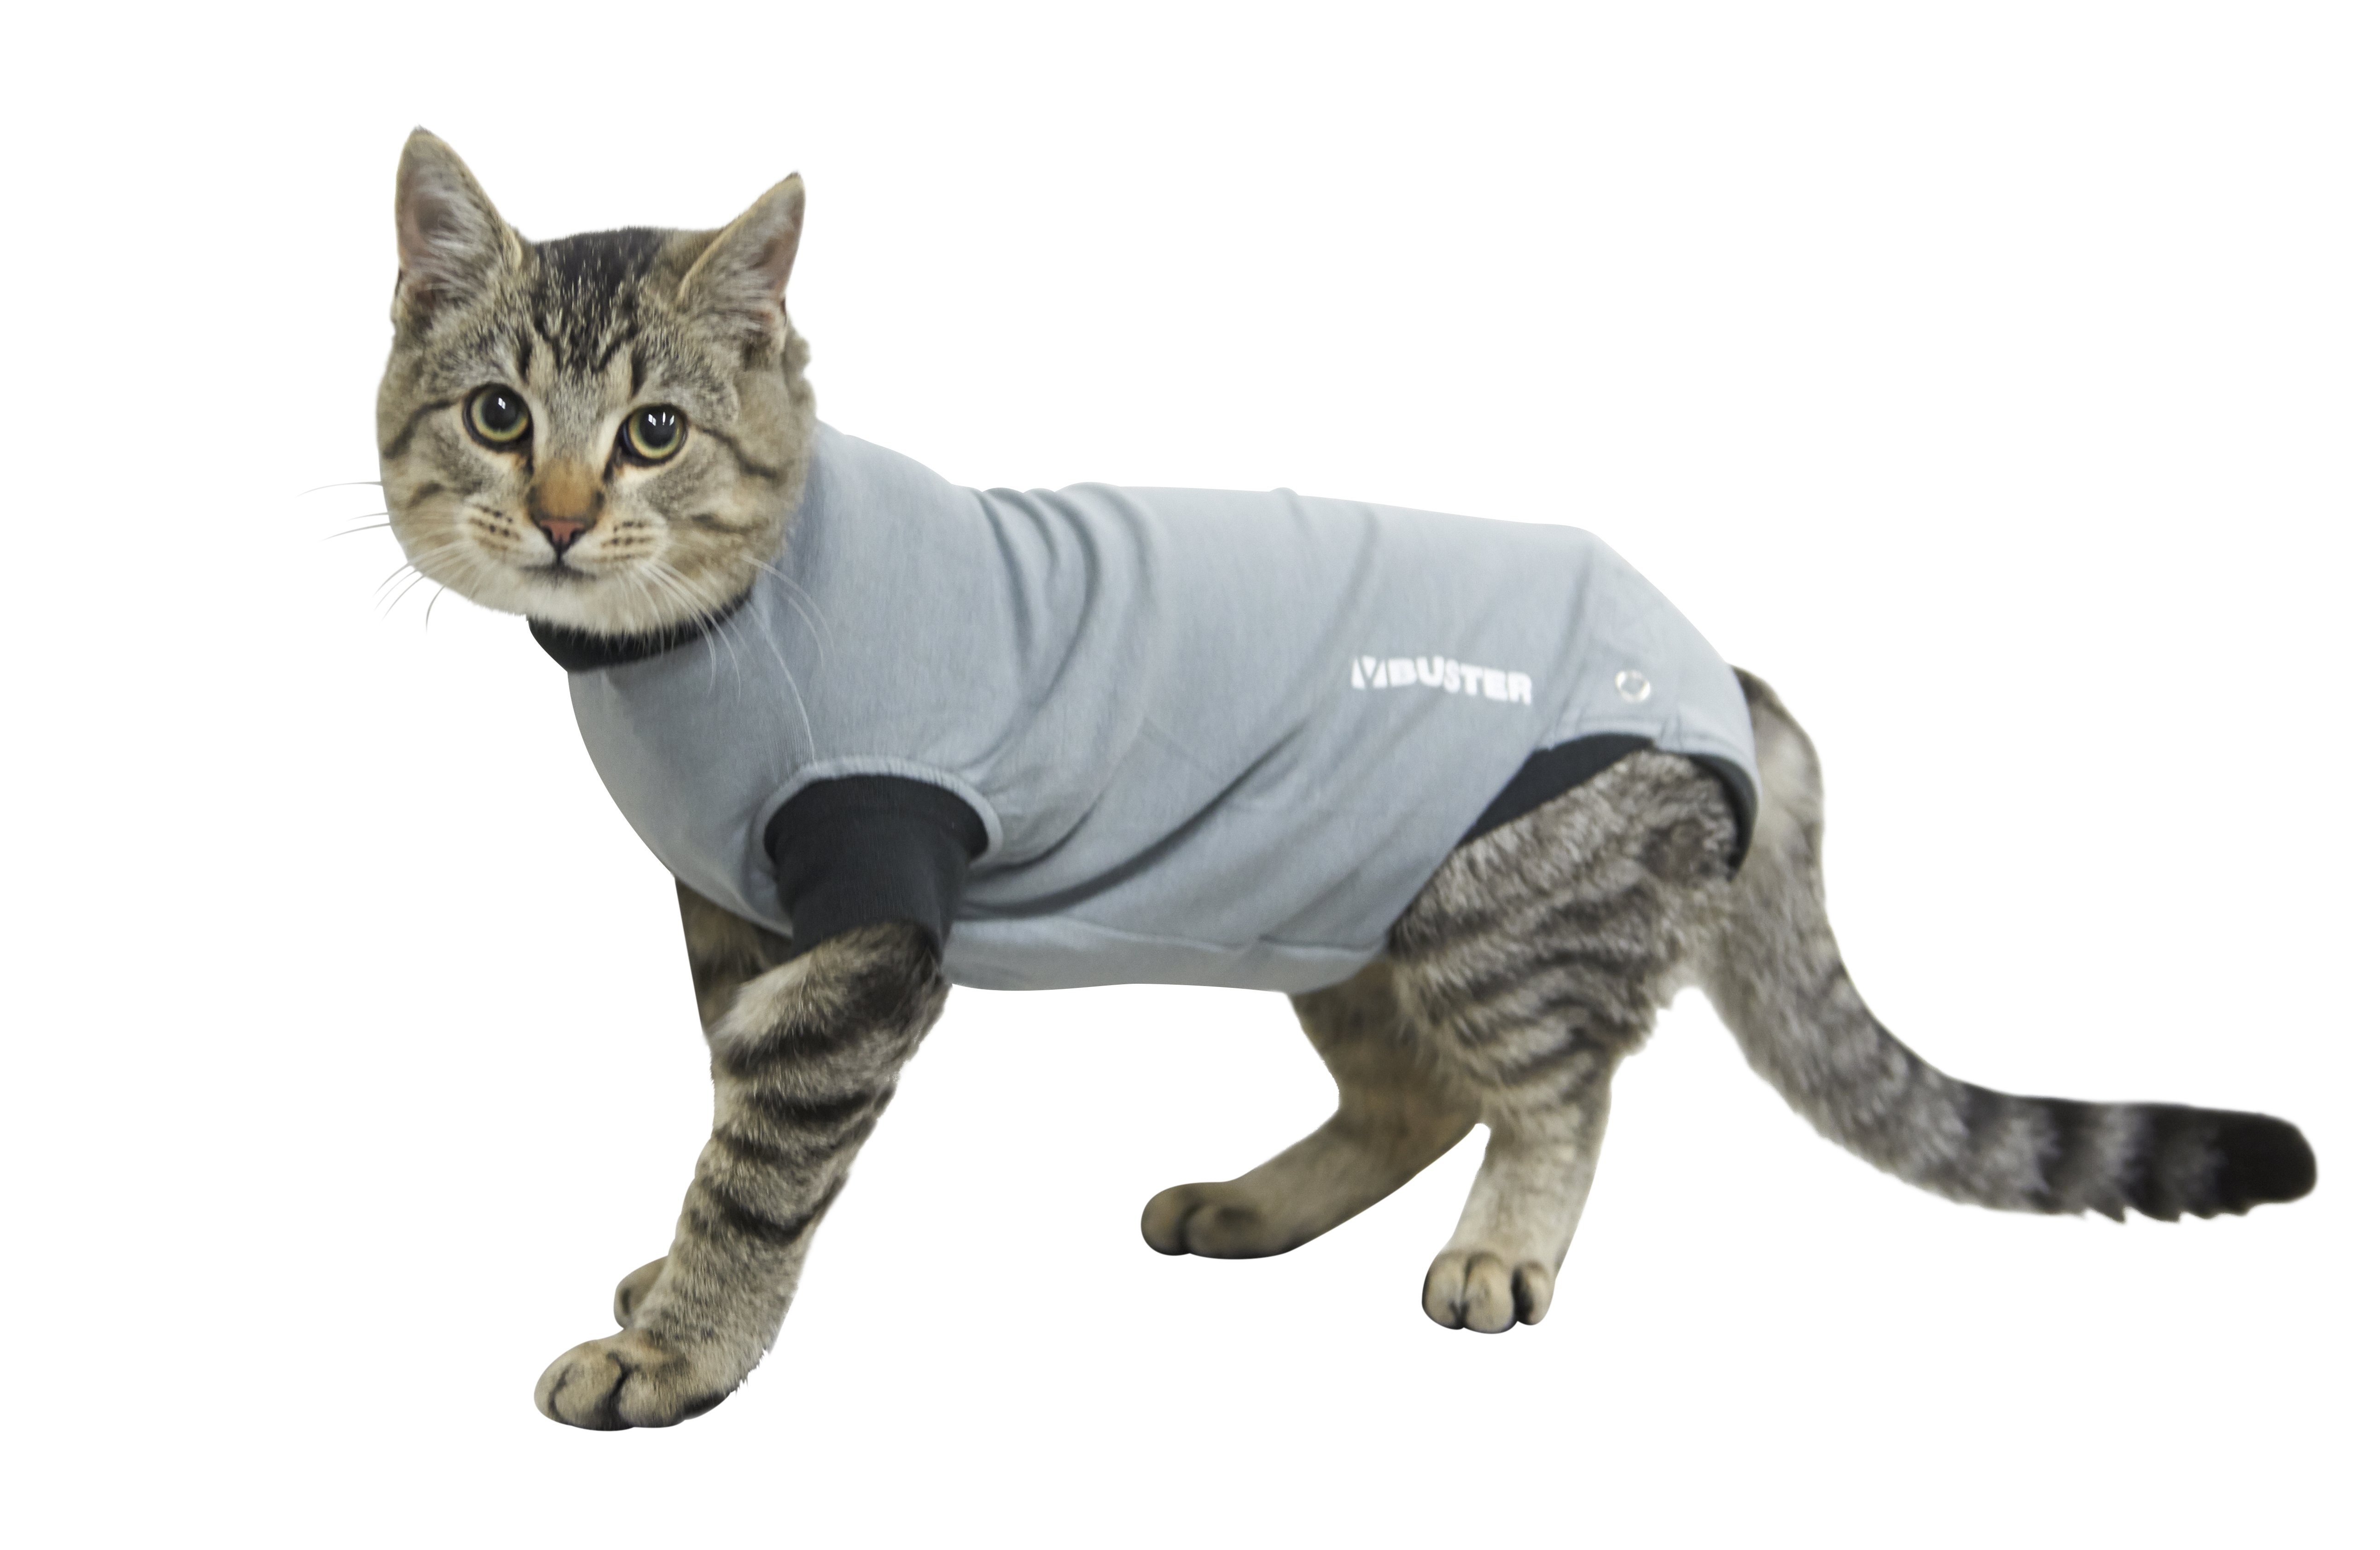 BUSTER Body Suit EasyGo for cats, grey/black, 38,5 cm, size XS